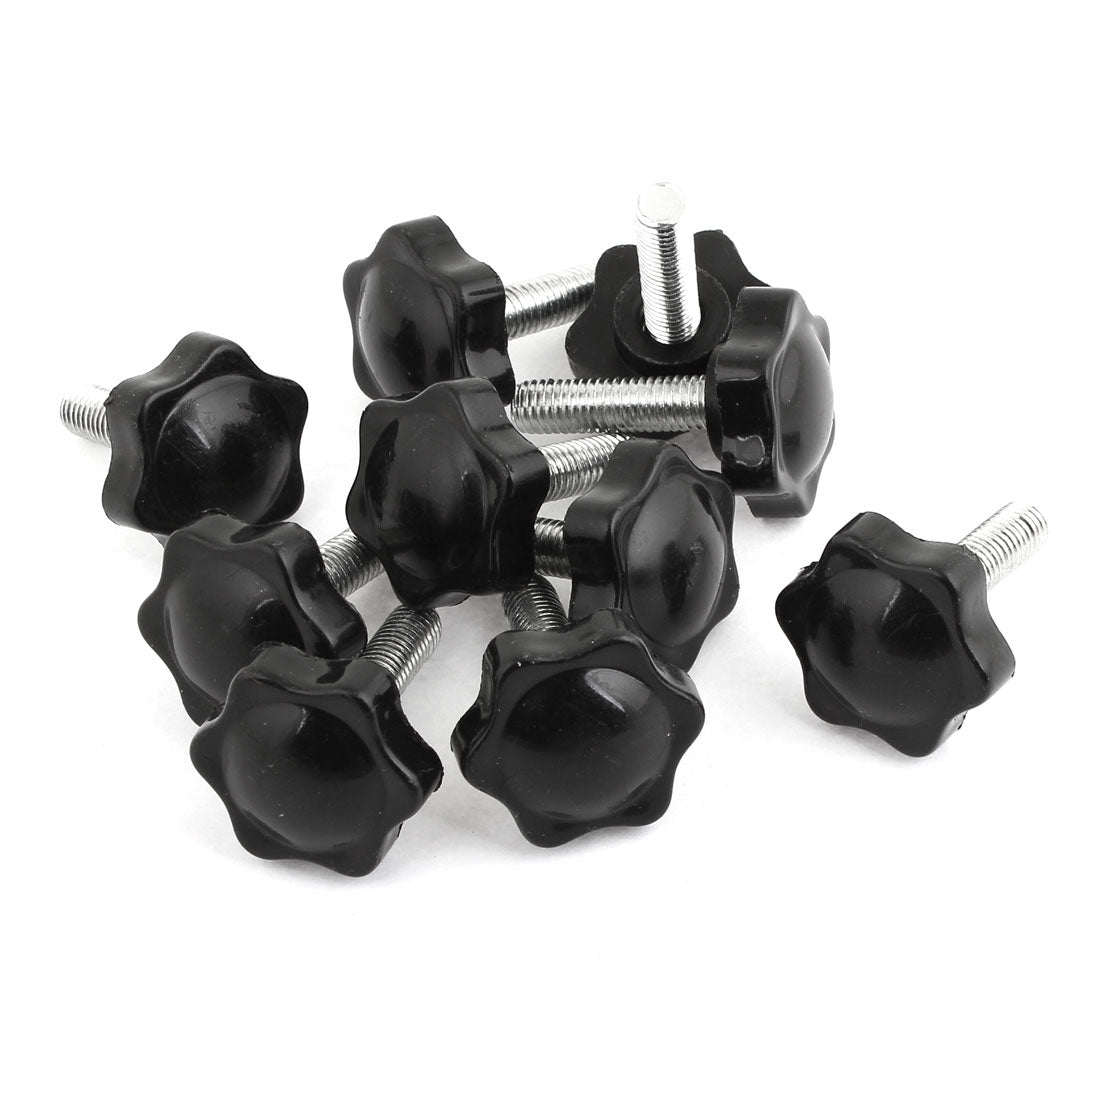 uxcell Uxcell 10 Pieces M8 x 30mm Male Thread 32mm Hex Shaped Head Clamping Screw Knob Black